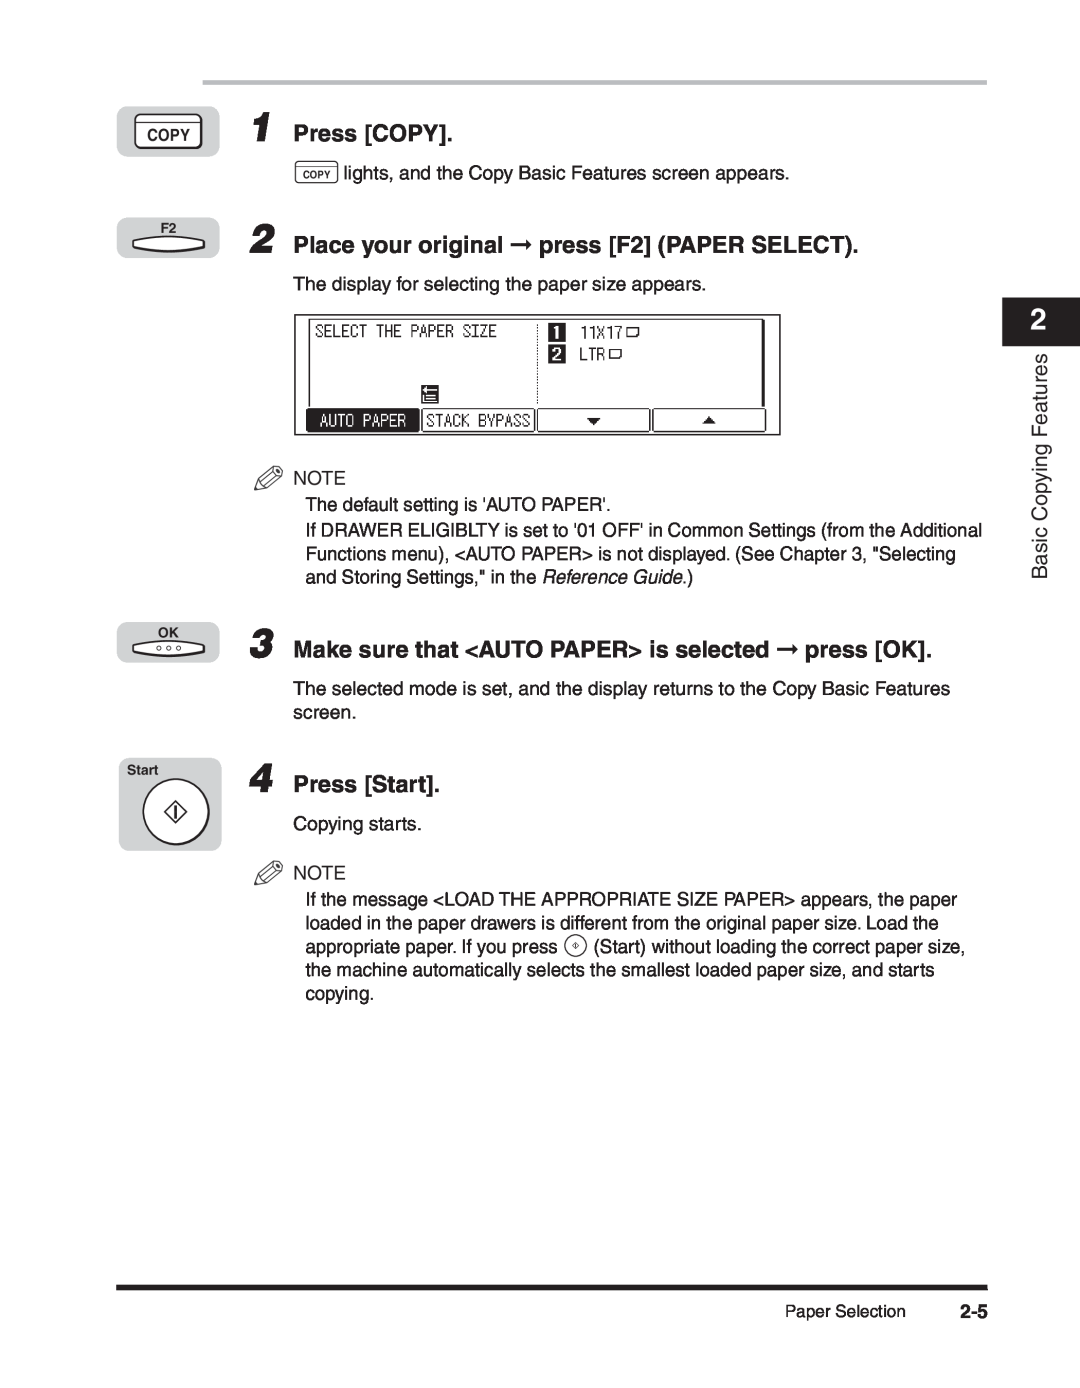 Canon 2300 manual Place your original press F2 PAPER SELECT, Make sure that AUTO PAPER is selected press OK, Press COPY 